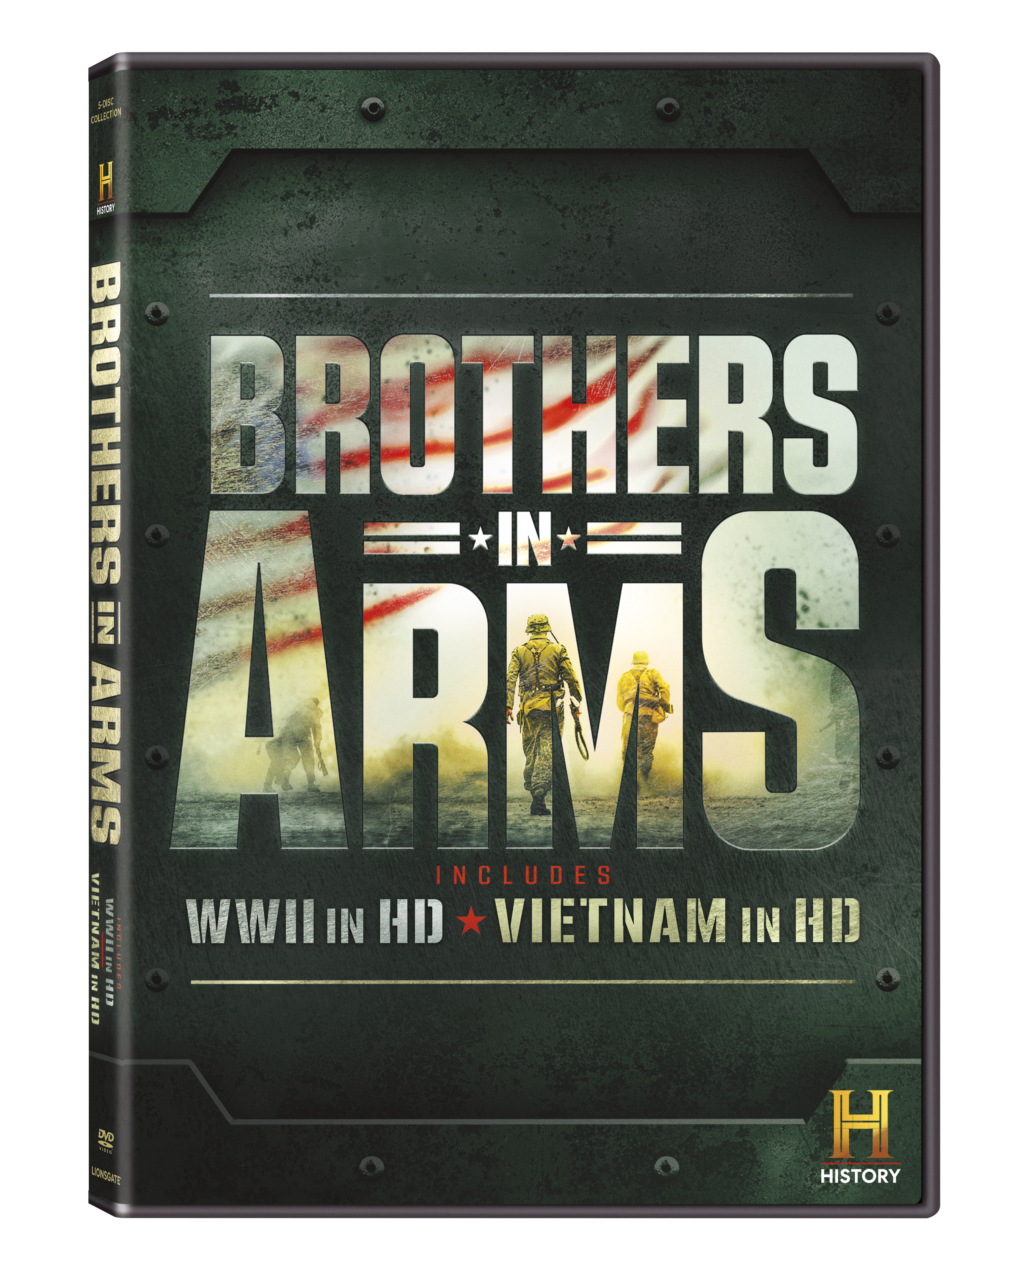 Brothers In Arms: WWII & Vietnam War In HD DVD cover (Lionsgate/History)